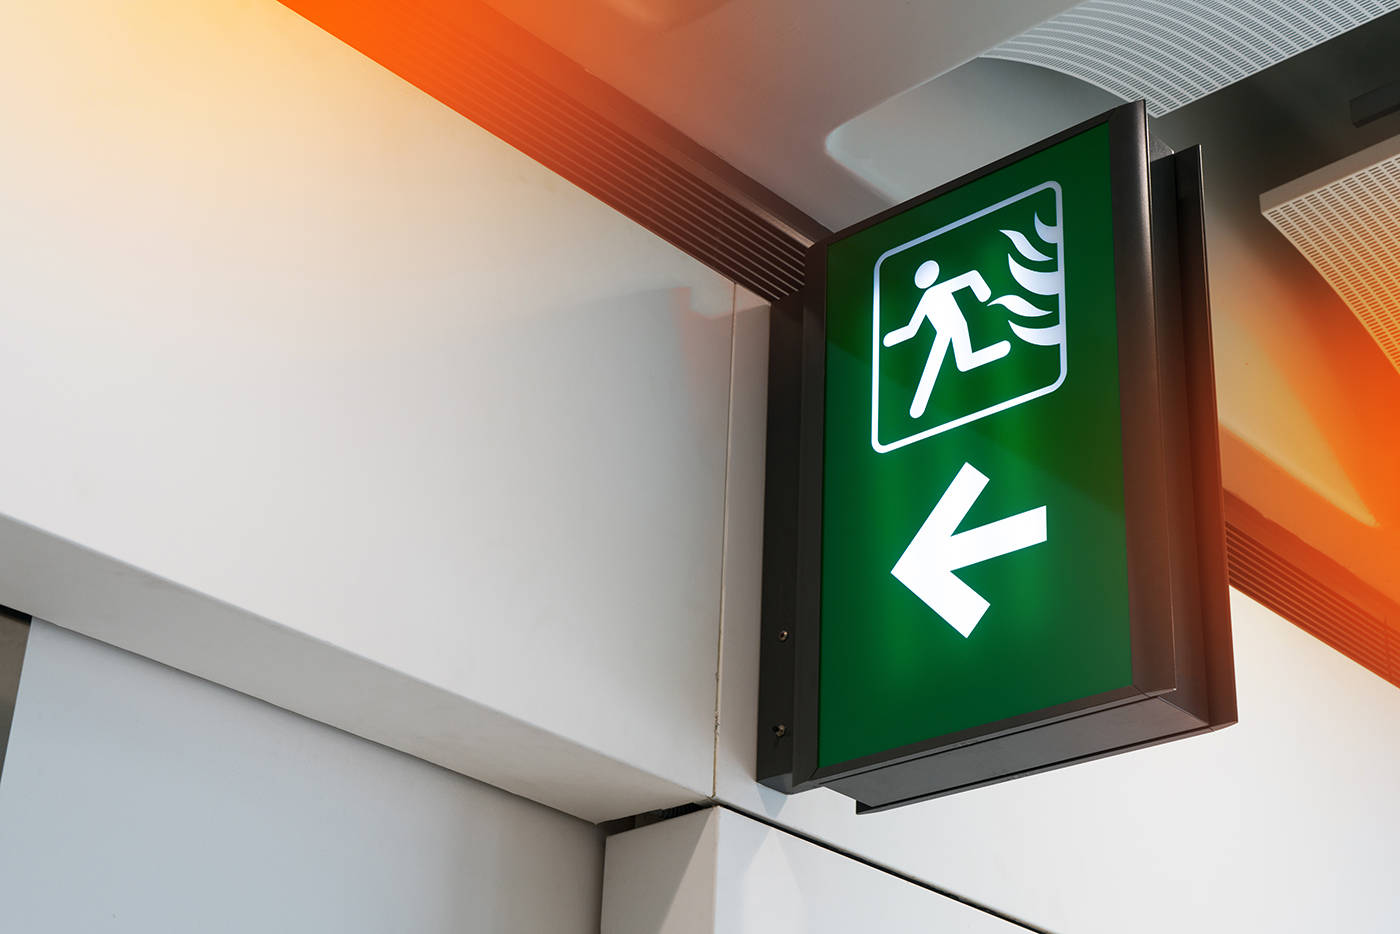 Emergency lighting, illuminated green fire exit signs, in a public building